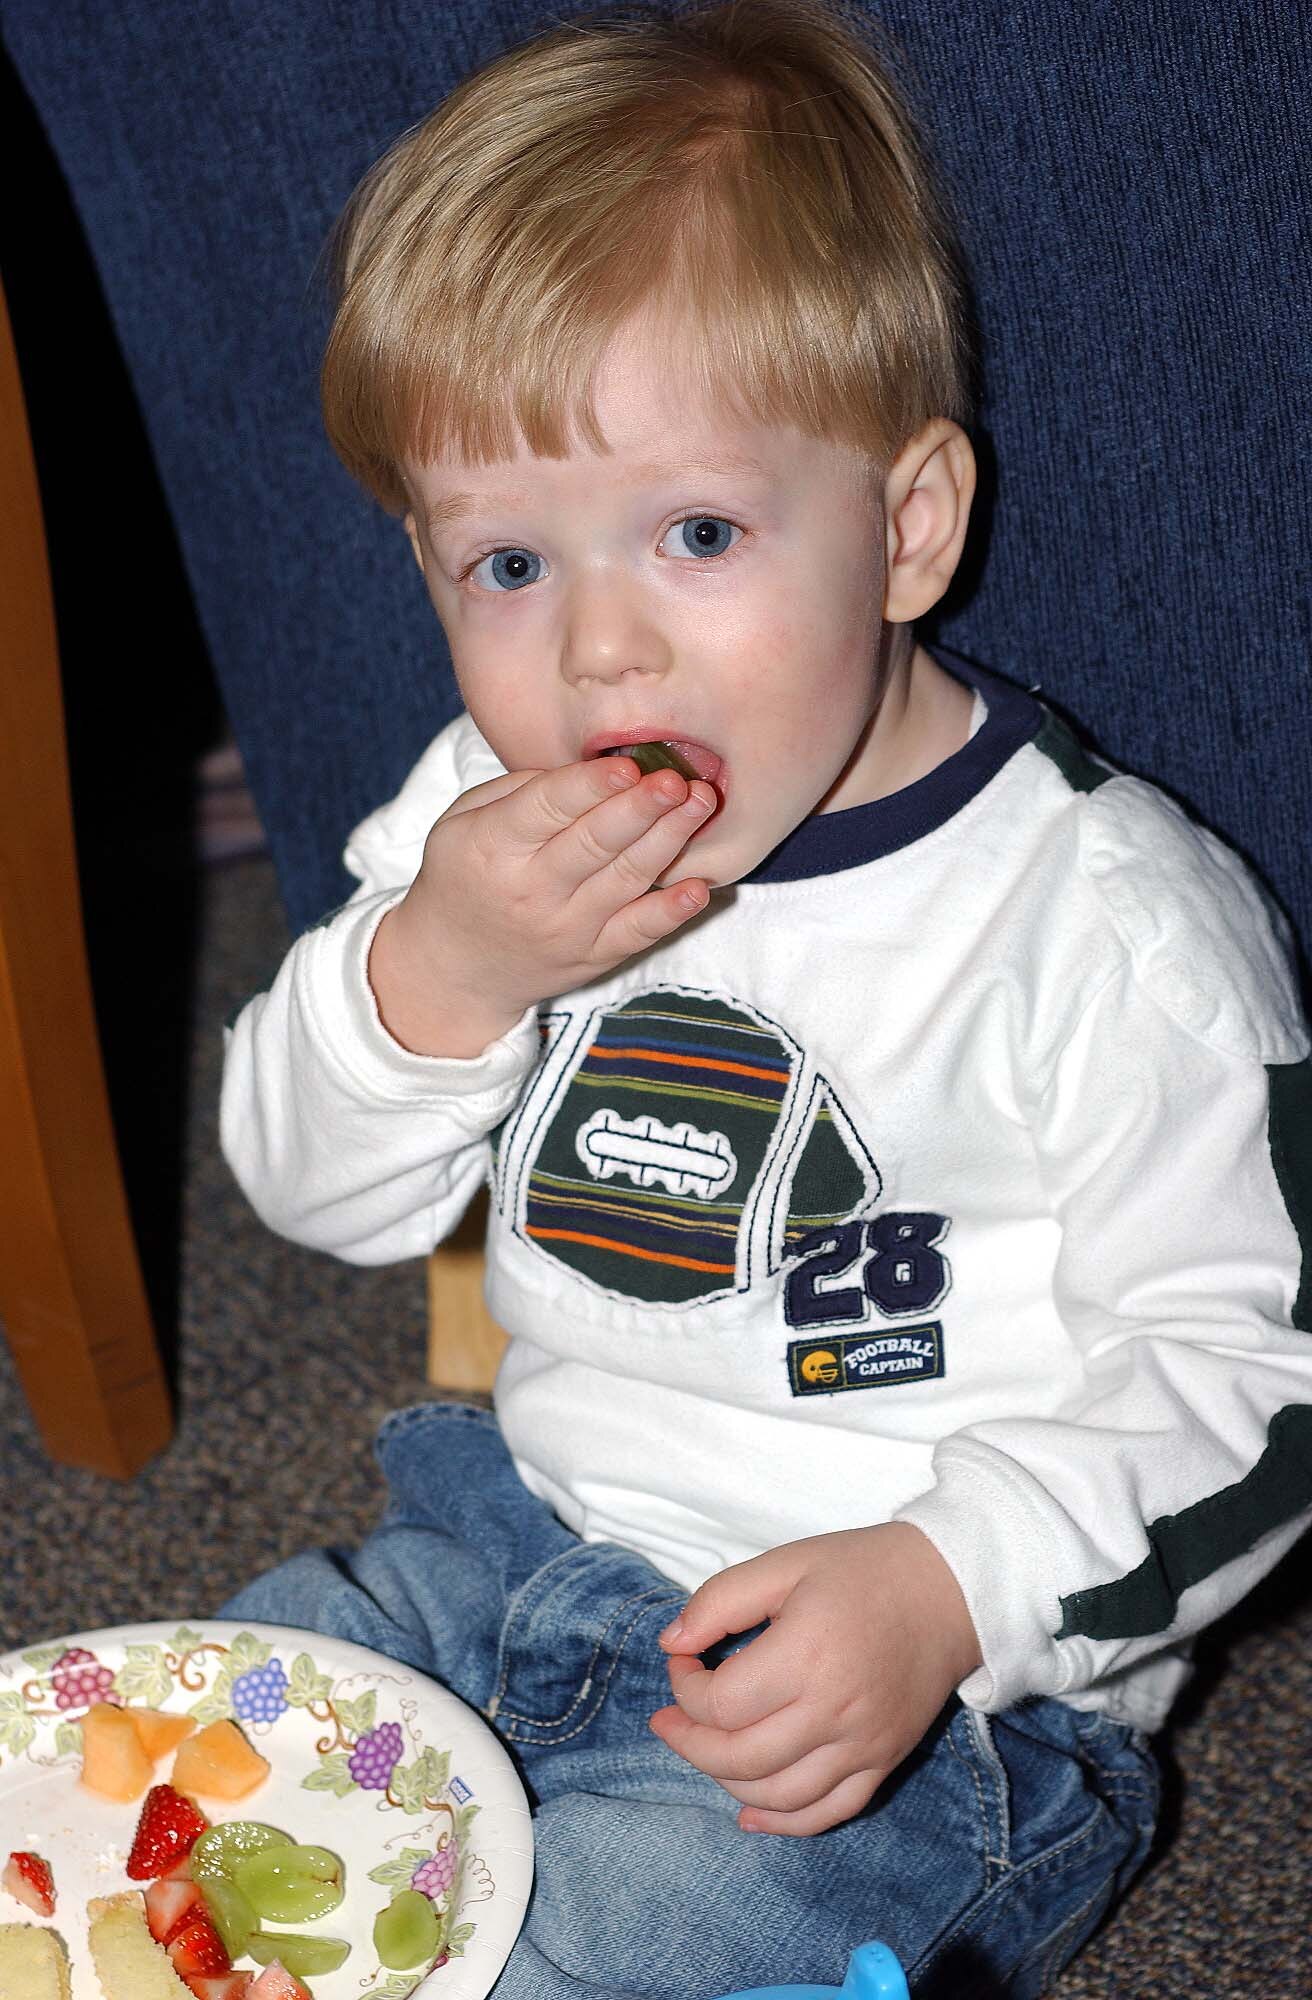 Matthew Sims, son of Capt. and Mrs. Bill Sims, 319th Area Defense Counsel, enjoys a tasty treat at an open-house event at the Airmen and Family Readiness Center here March 28.  The event, which included several base agencies educated base personnel and family members on what the center has to offer. (U.S. Air Force photo/Tech. Sgt. Joseph Kapinos)